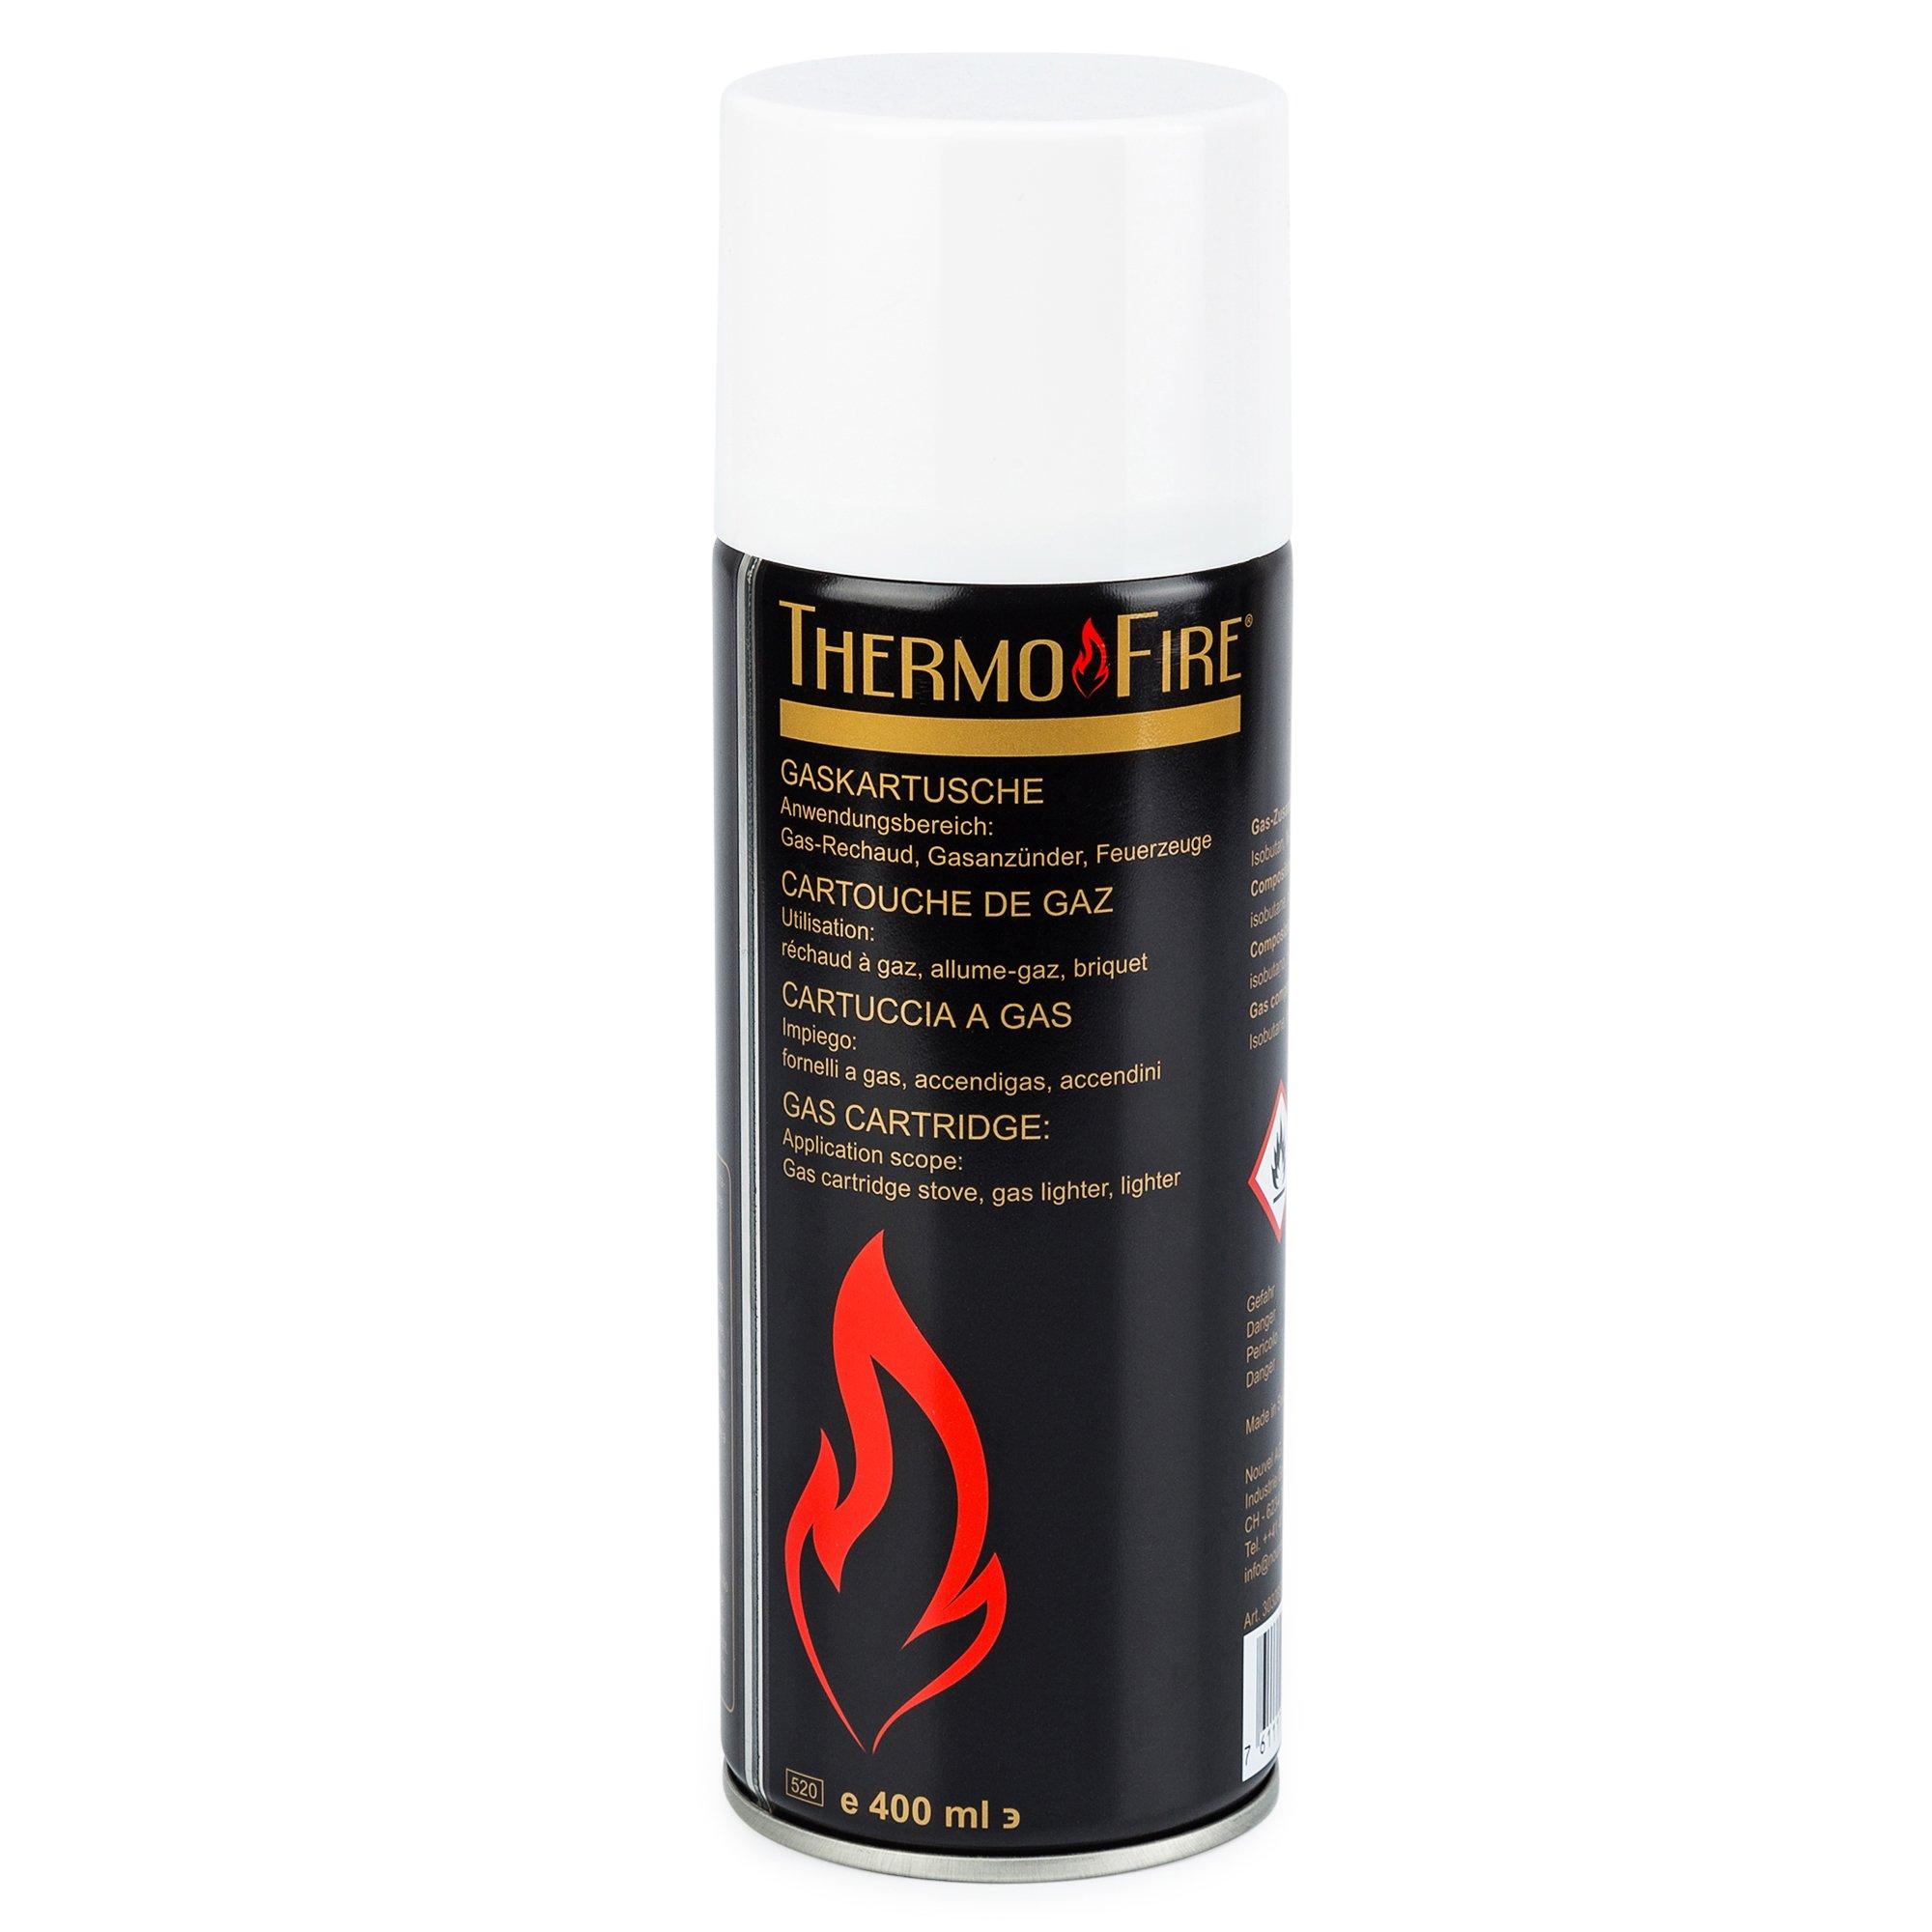 Image of THERMO FIRE Gaskartusche - 400ml